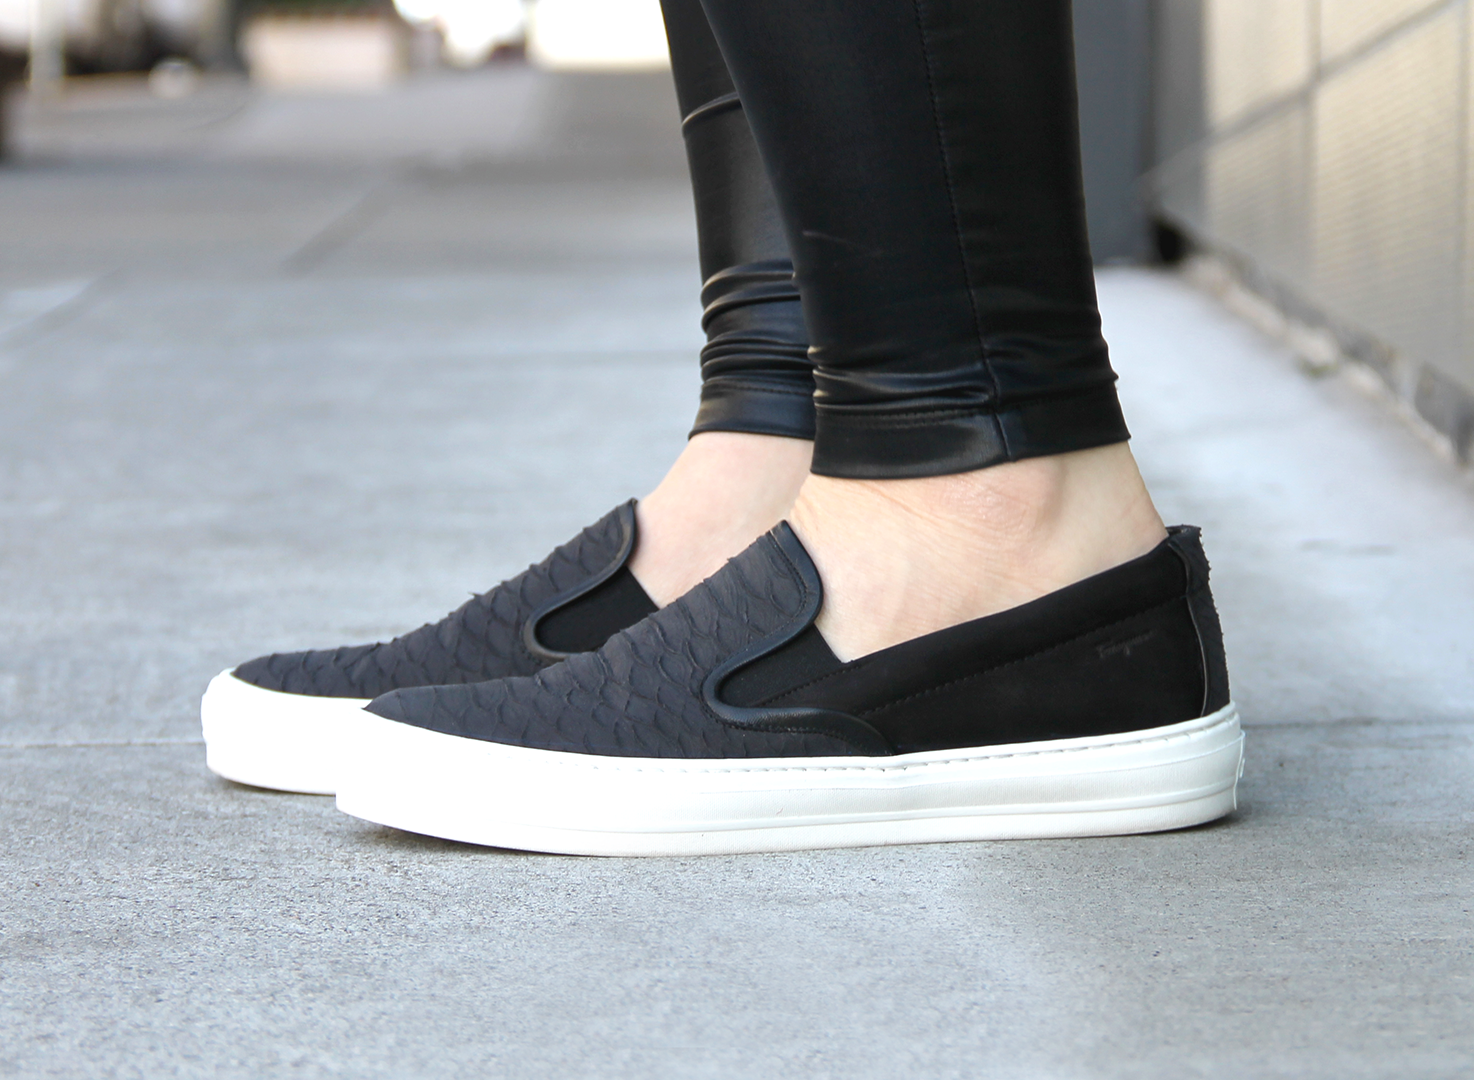 Slip on Sneakers - Wear the Trend | Fashion | Just Add Glam